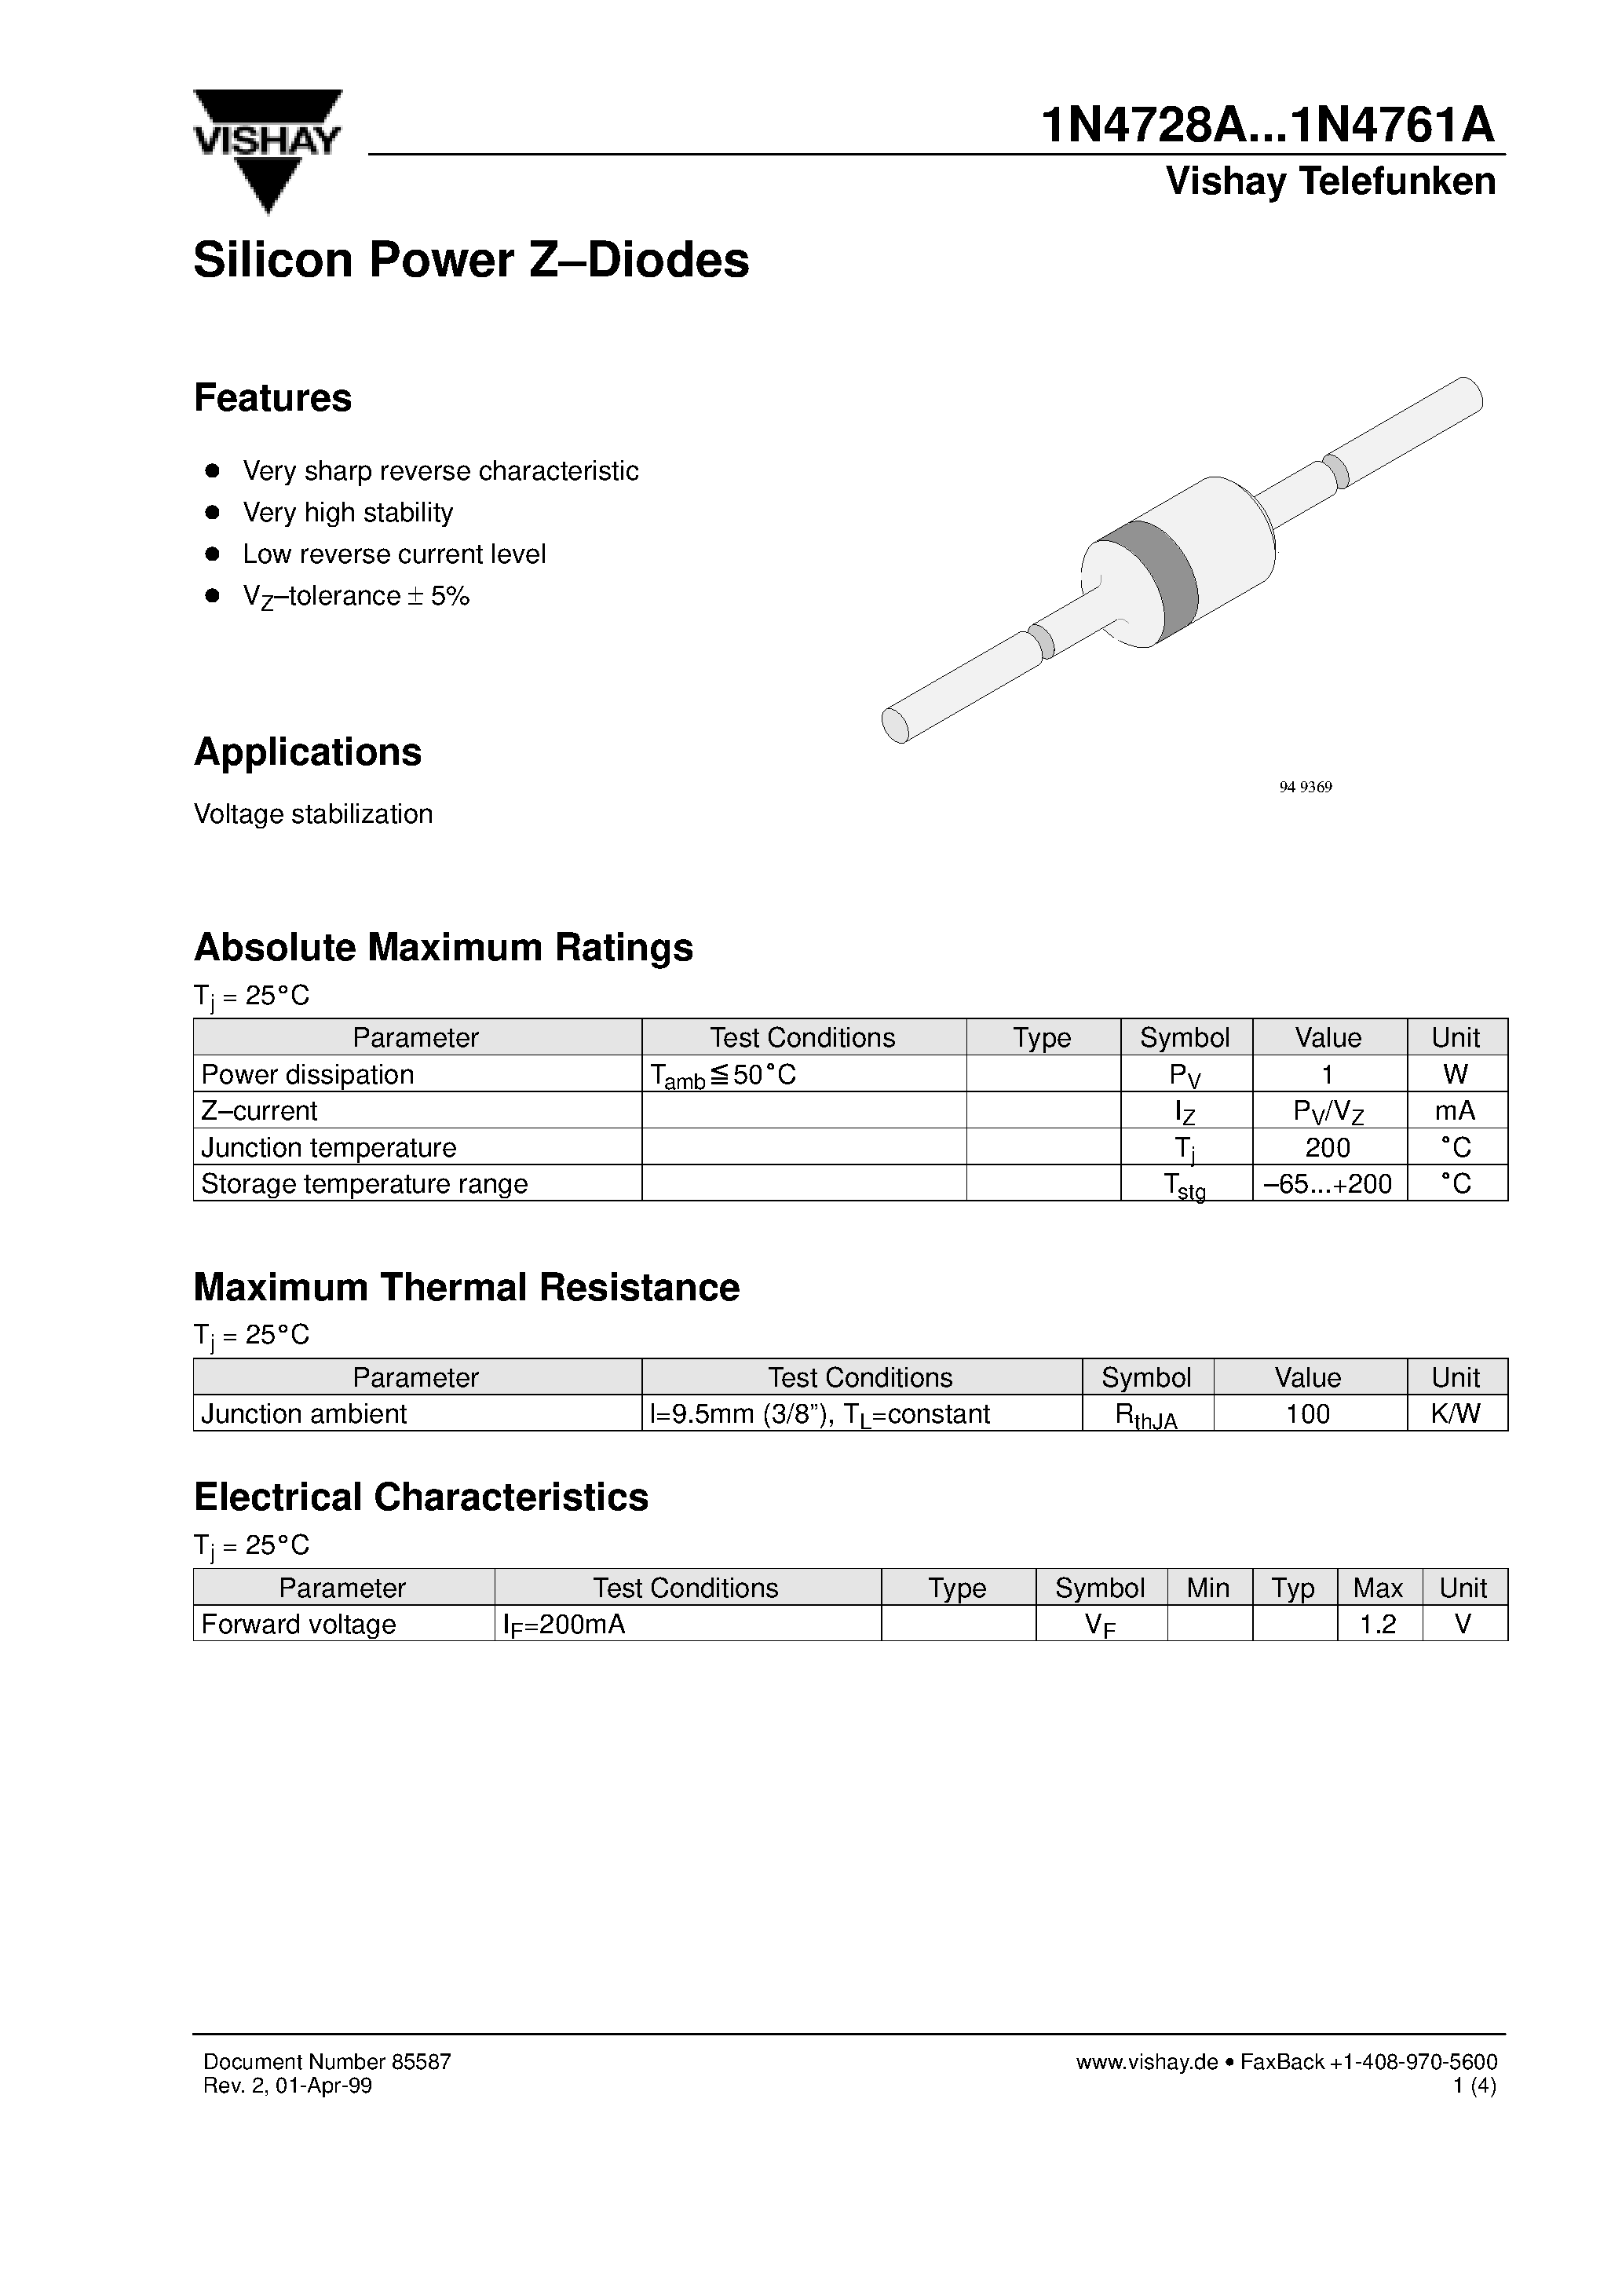 Datasheet 1N4756A - Silicon Power Z-Diodes page 1